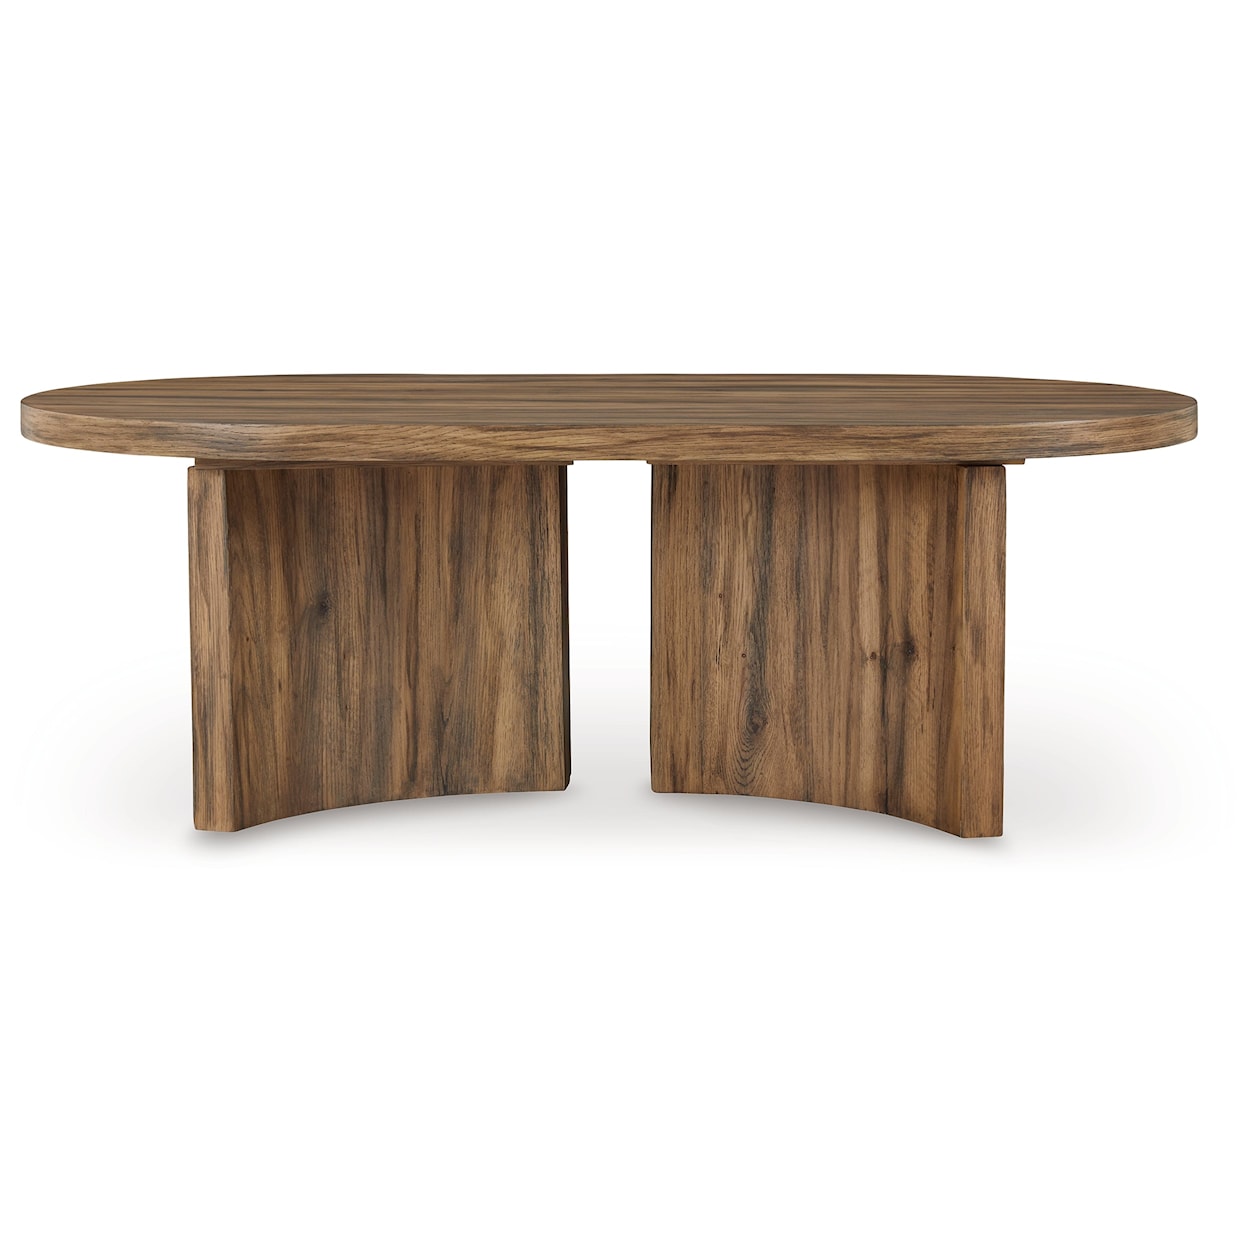 Signature Design by Ashley Austanny Oval Coffee Table